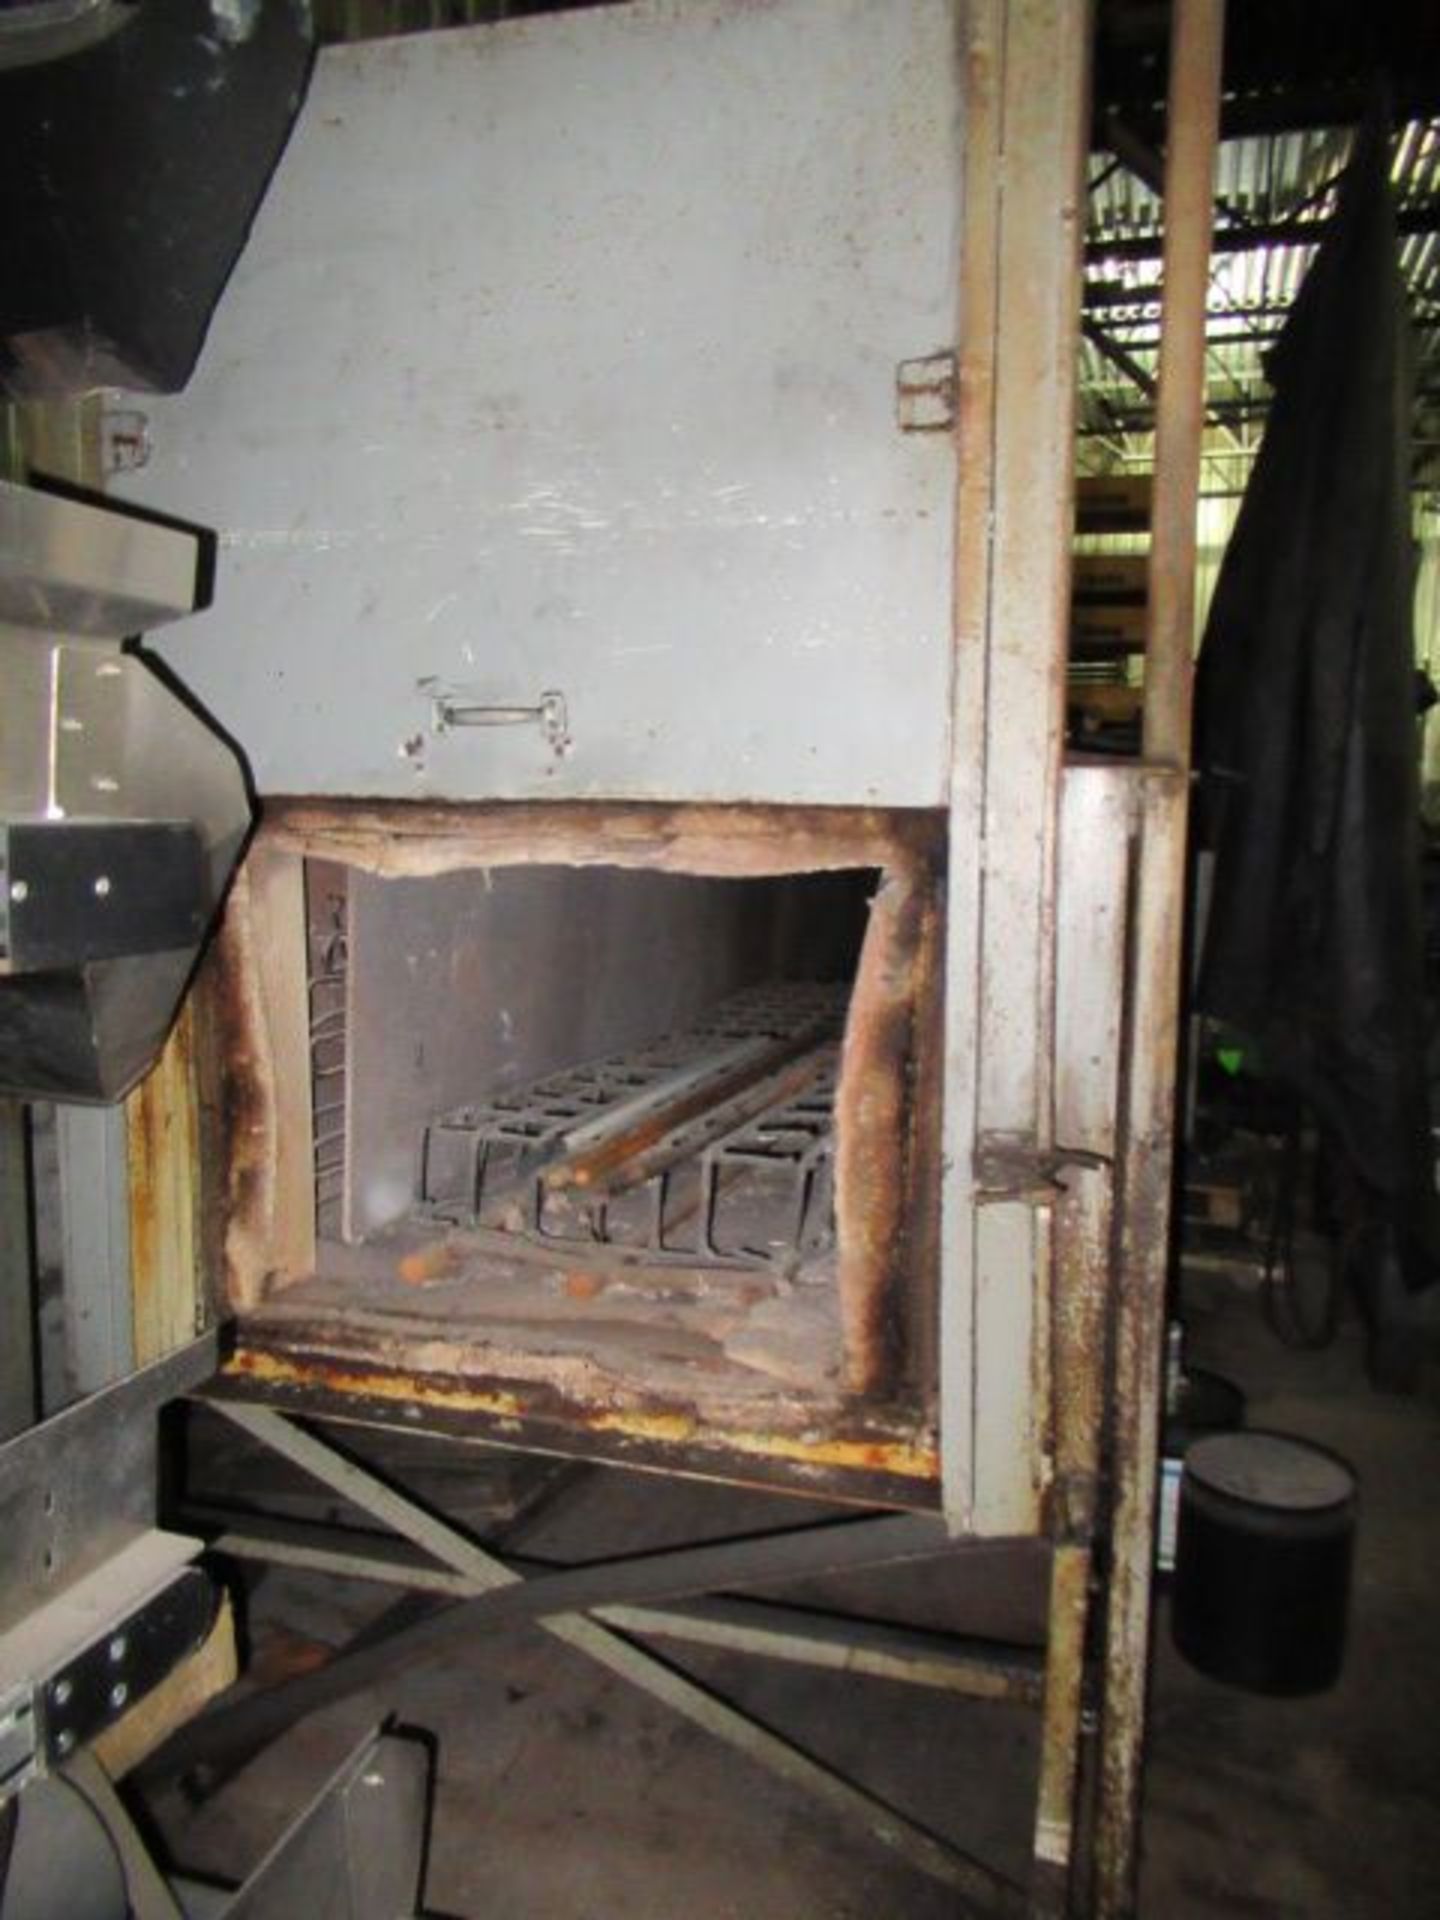 Furnace 36 x 26 Opening Overall 67" x 12 x 20'L ($600 Rigging Cost)